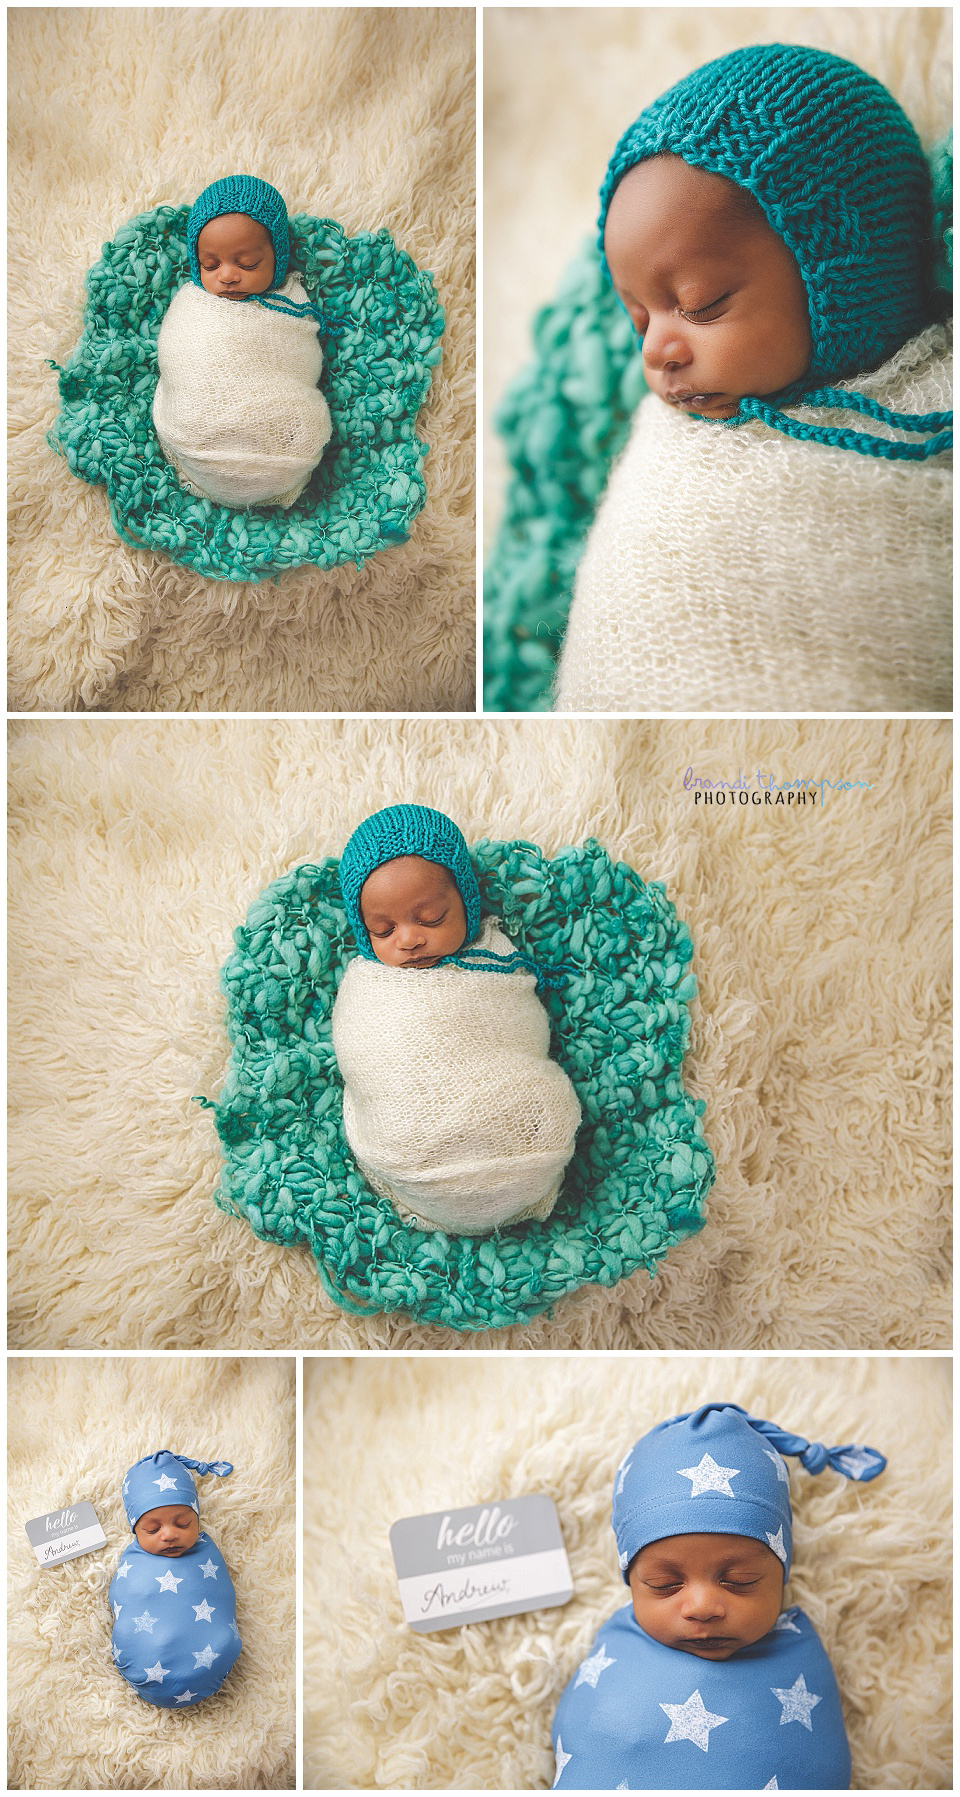 newborn baby on cream rug in teal and white, and blue with stars